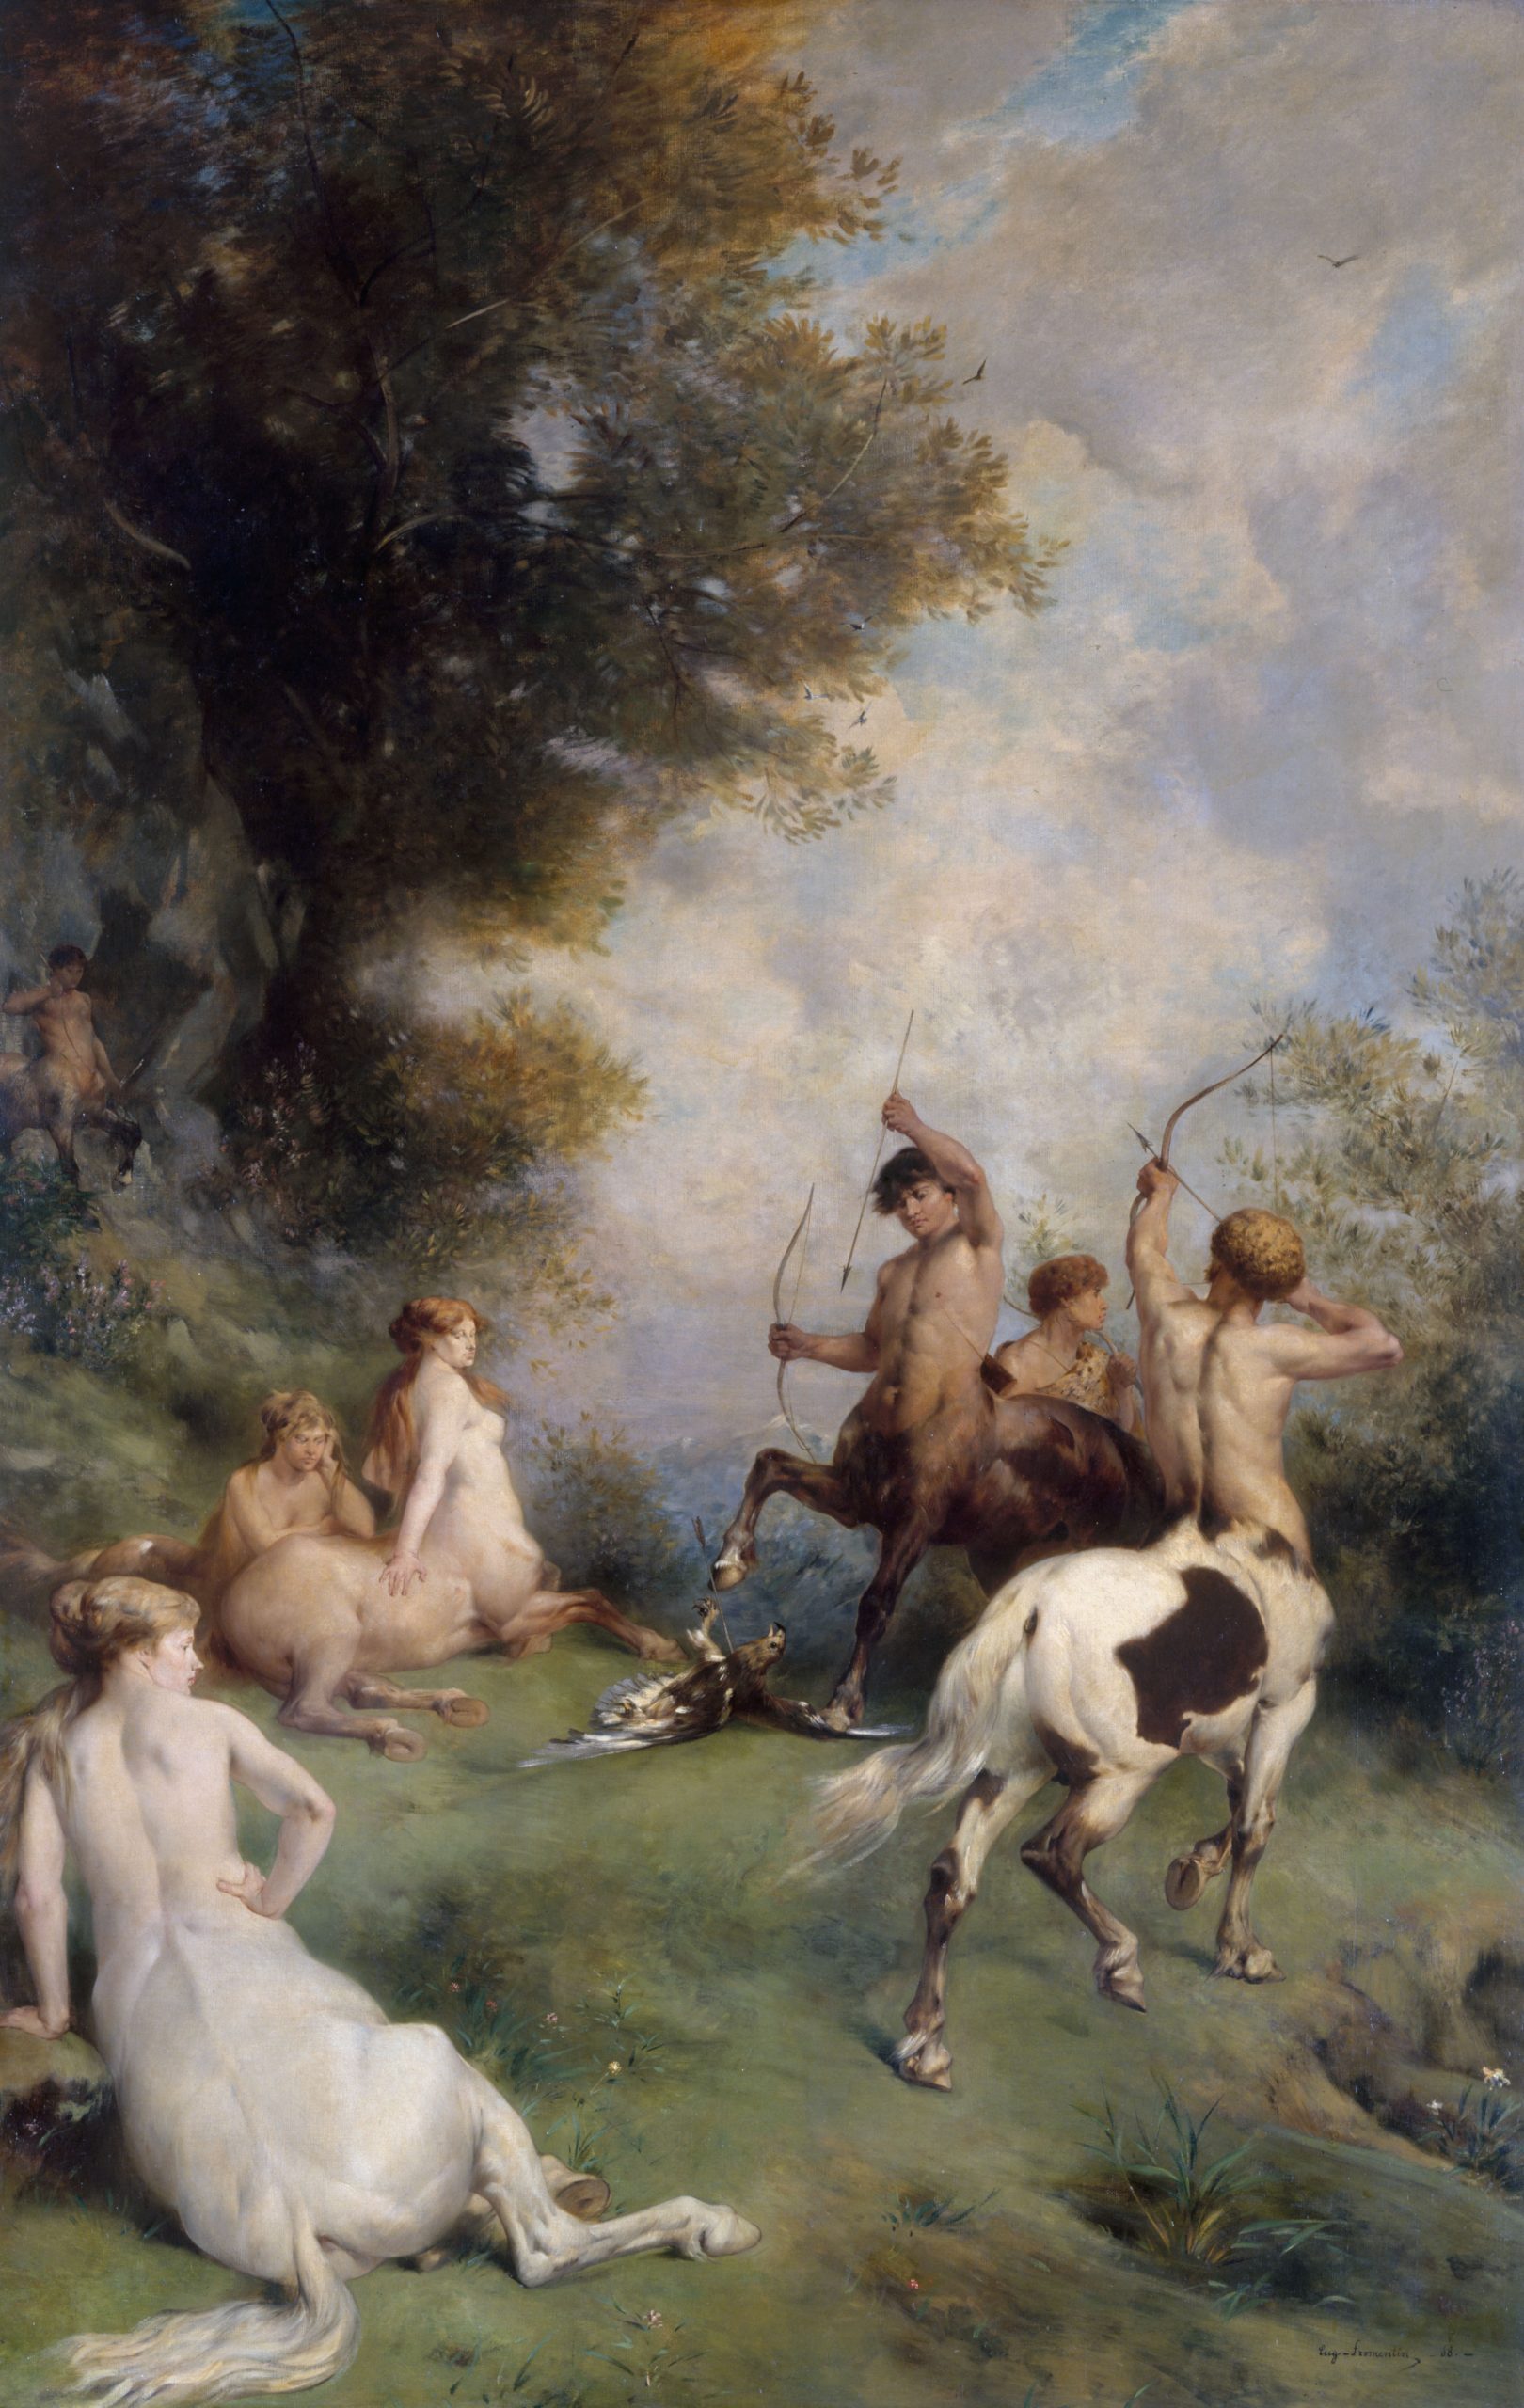 A group of centaurs leisurely relax together next to a tree while pointing arrows towards a creature on the ground.